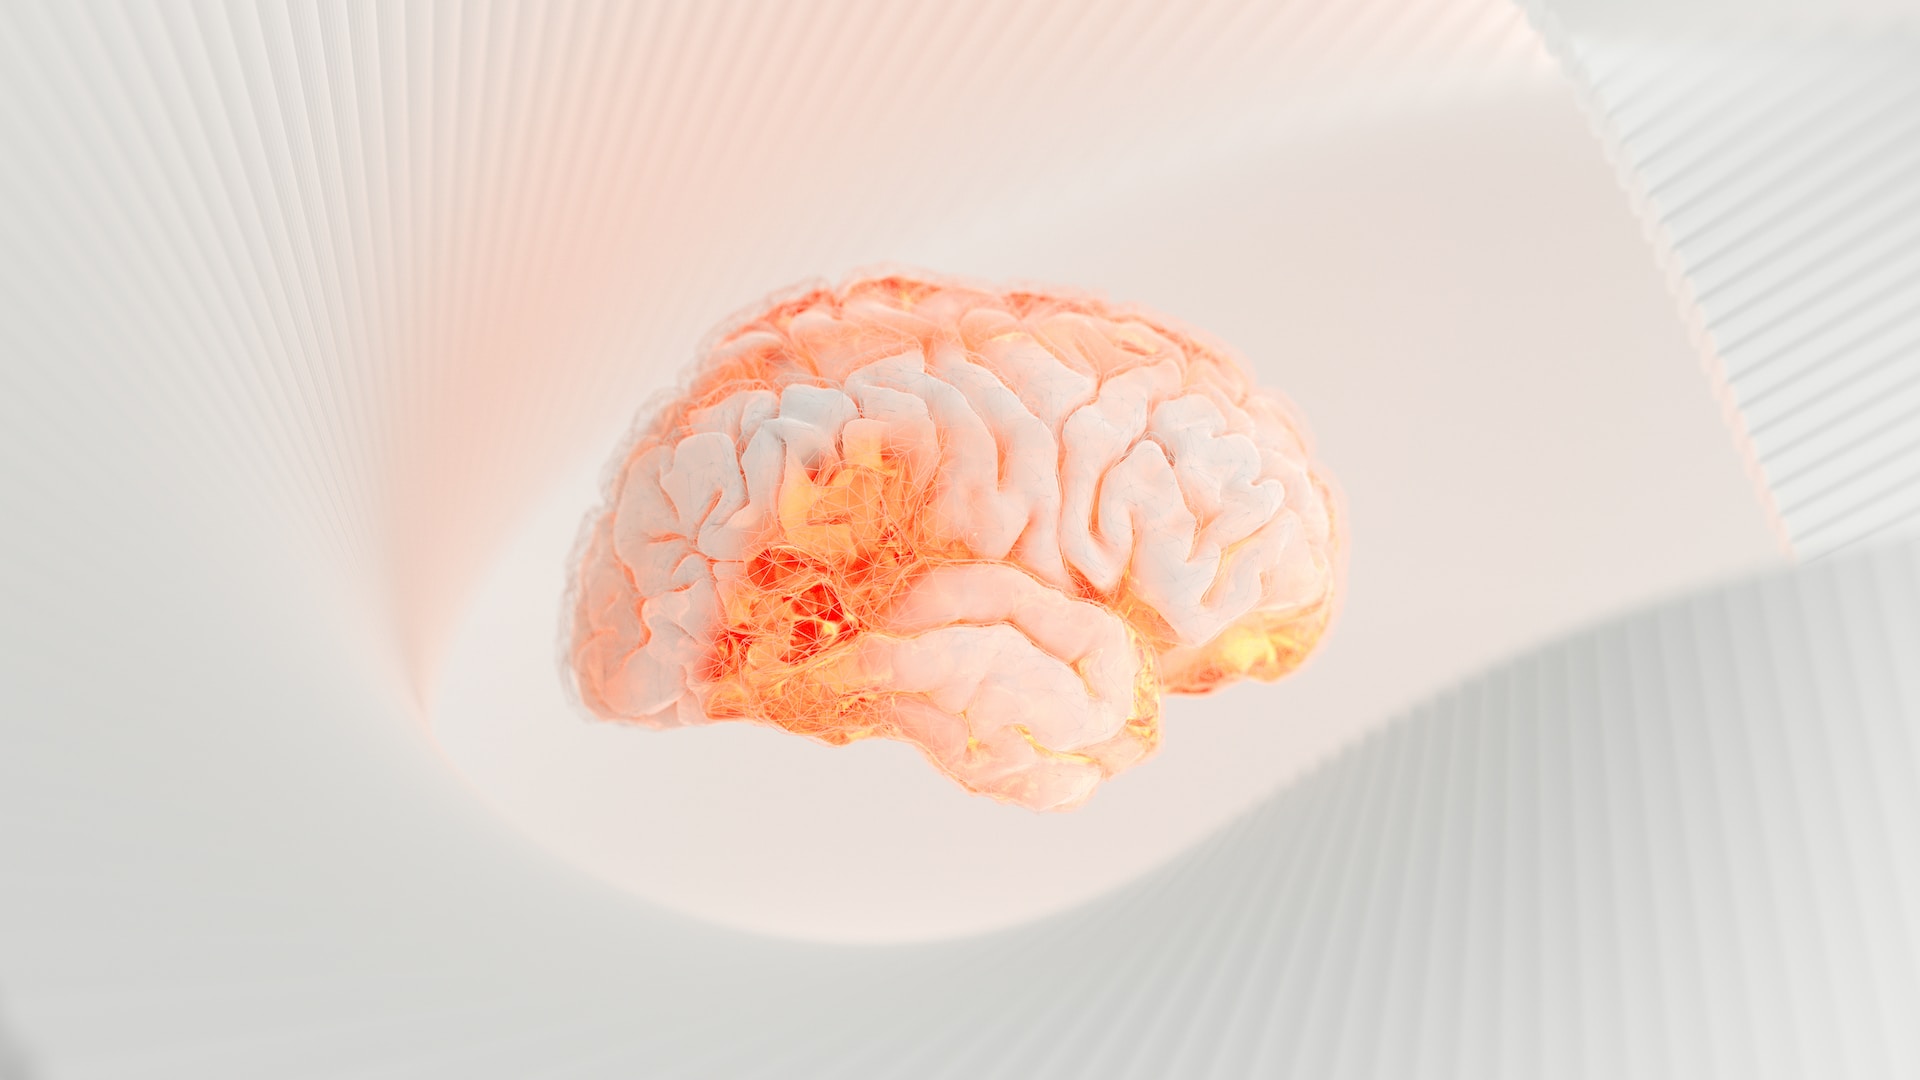 image of orange abstract brain with white and orange background | Kyndryl and Microsoft